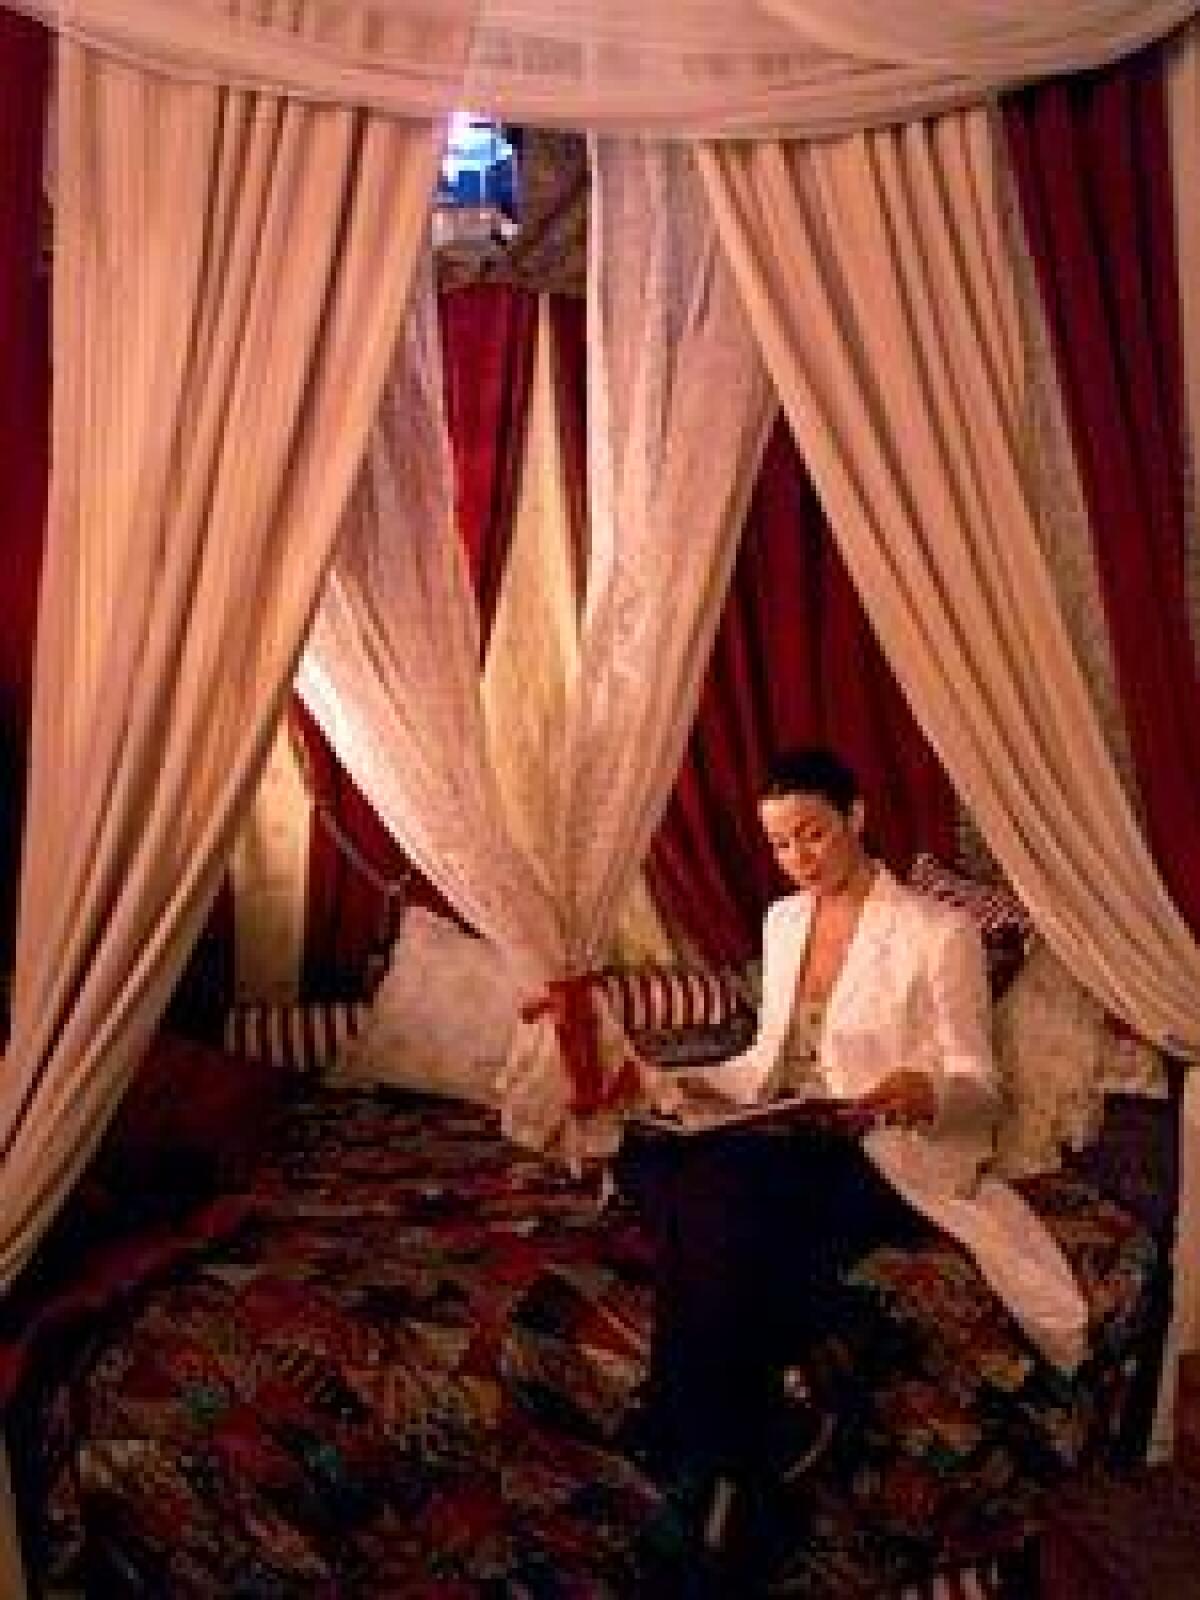 Actress Claudia Christian's remodeled basement has a Moroccan bed where guests often relax and socialize.